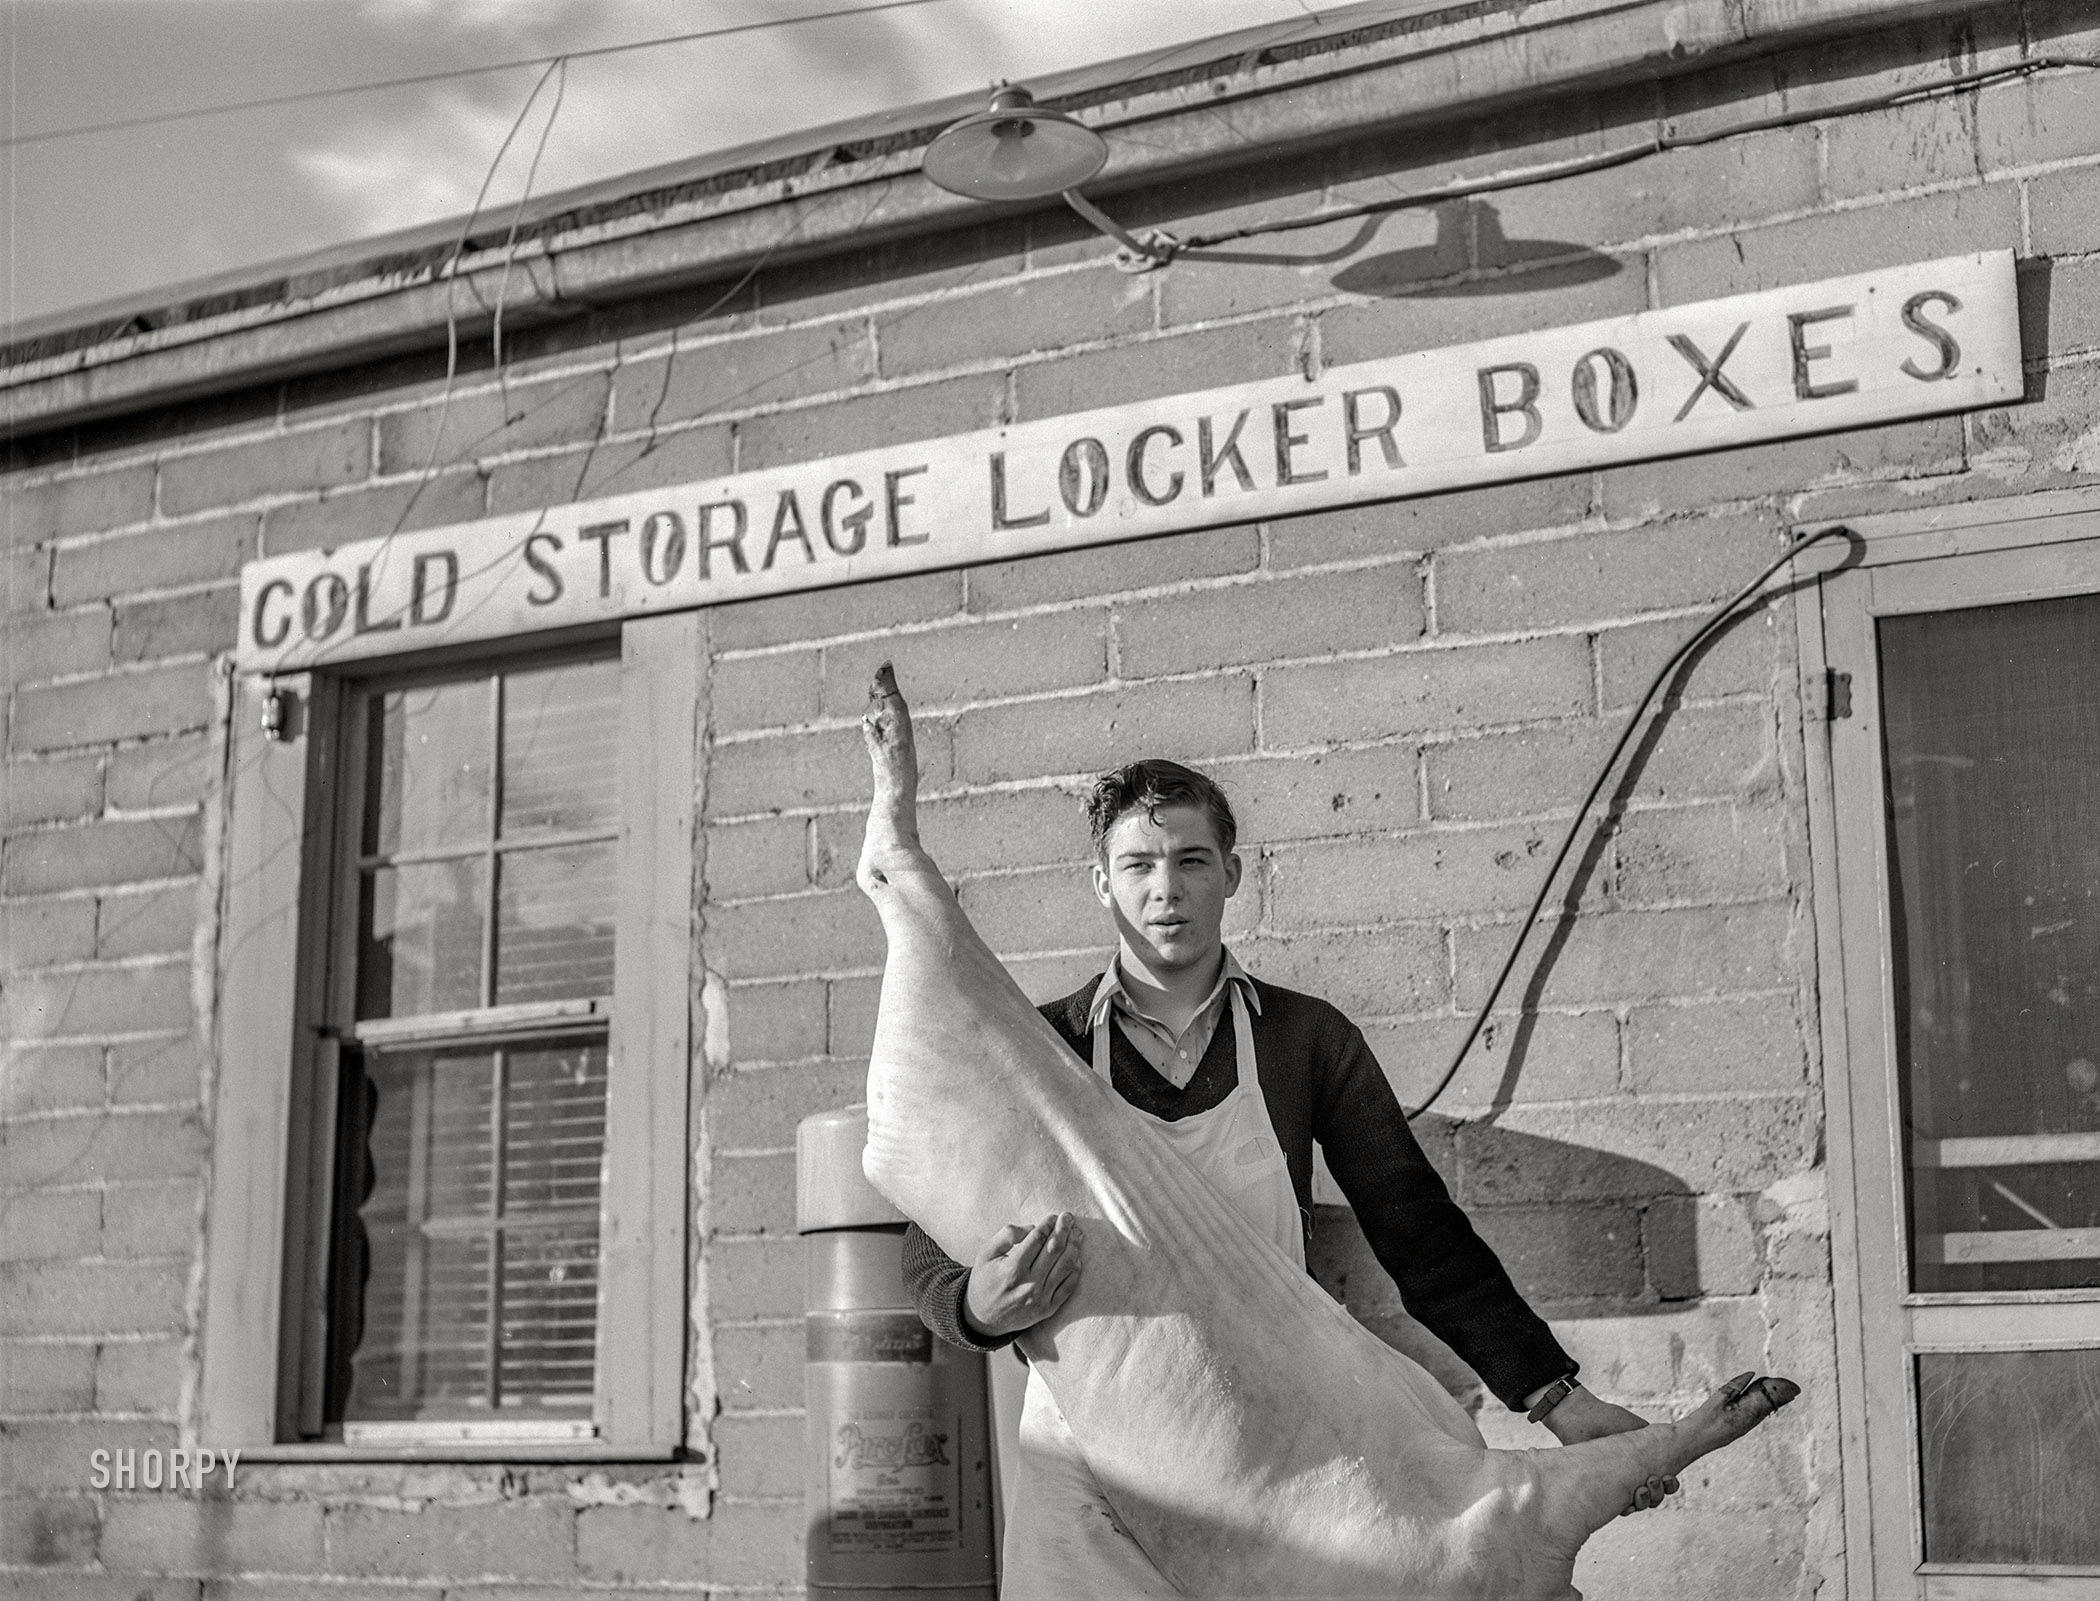 October 1940. "Bringing farmer's butchered pig into co-op cold storage lockers. Casselton, North Dakota." Photo by John Vachon for the Farm Security Administration. View full size.